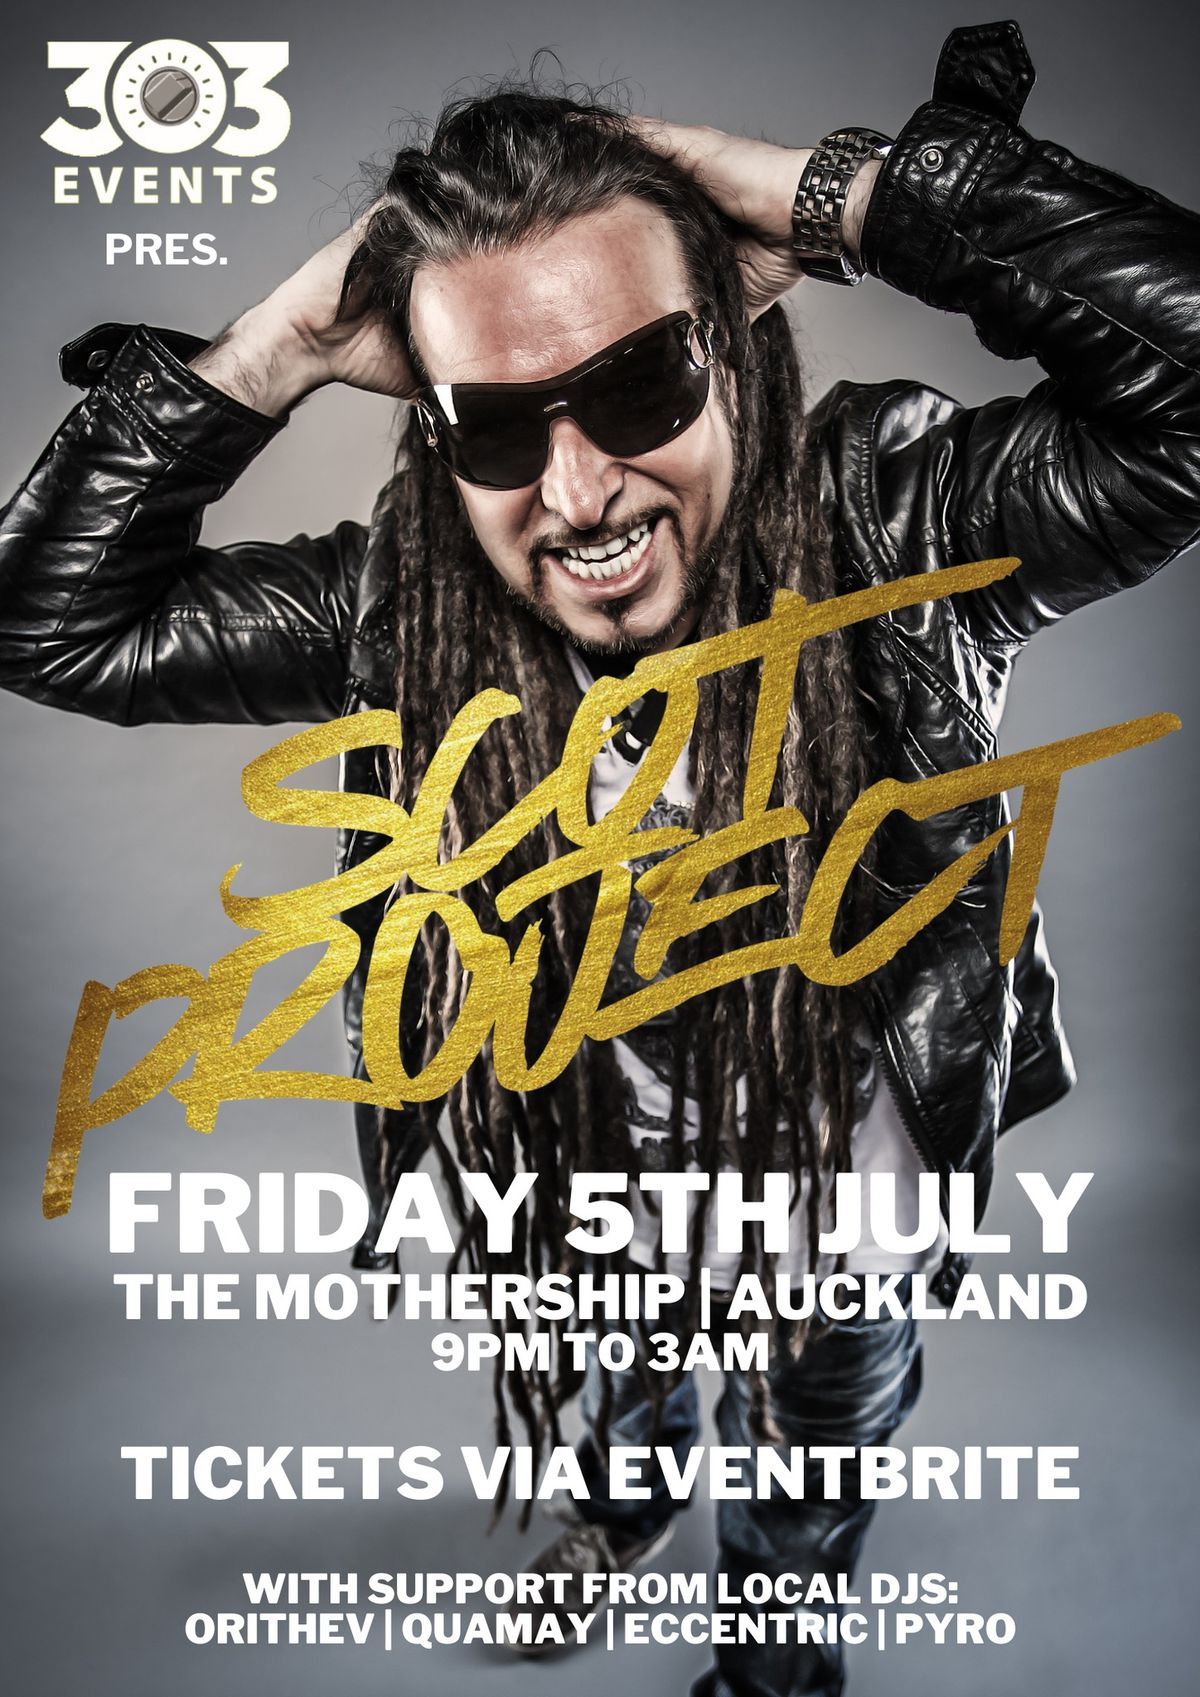 303 Events pres. Scot Project - live in Auckland - Friday 5th July